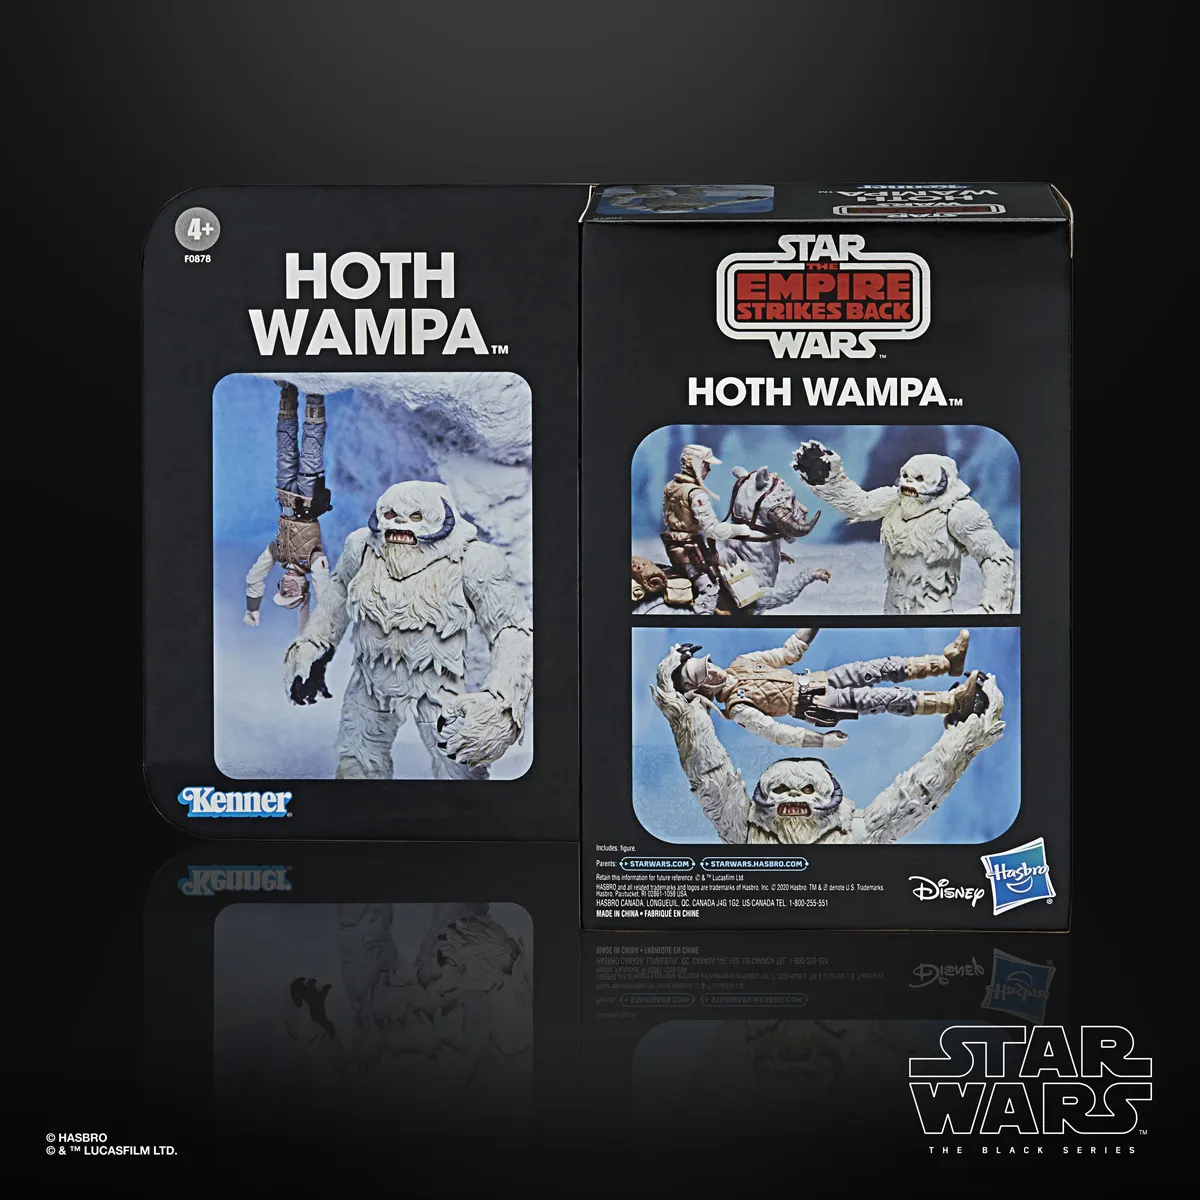 Star Wars The Black Series 6 Inch Scale Hoth Wampa Figure Pckging 1